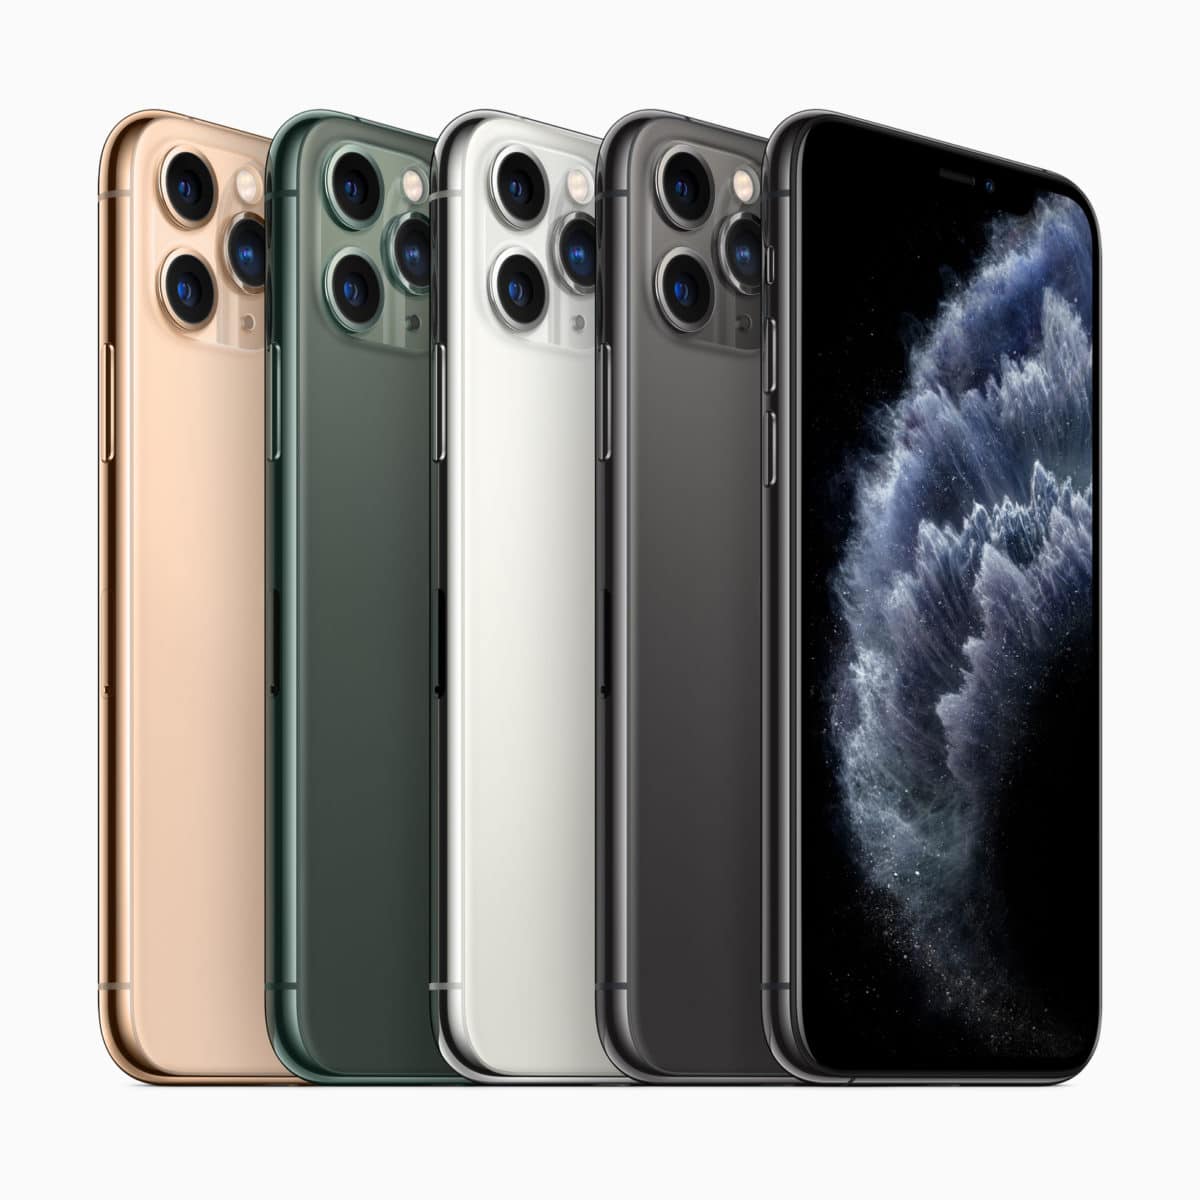 Which Color iPhone 11 Pro to buy